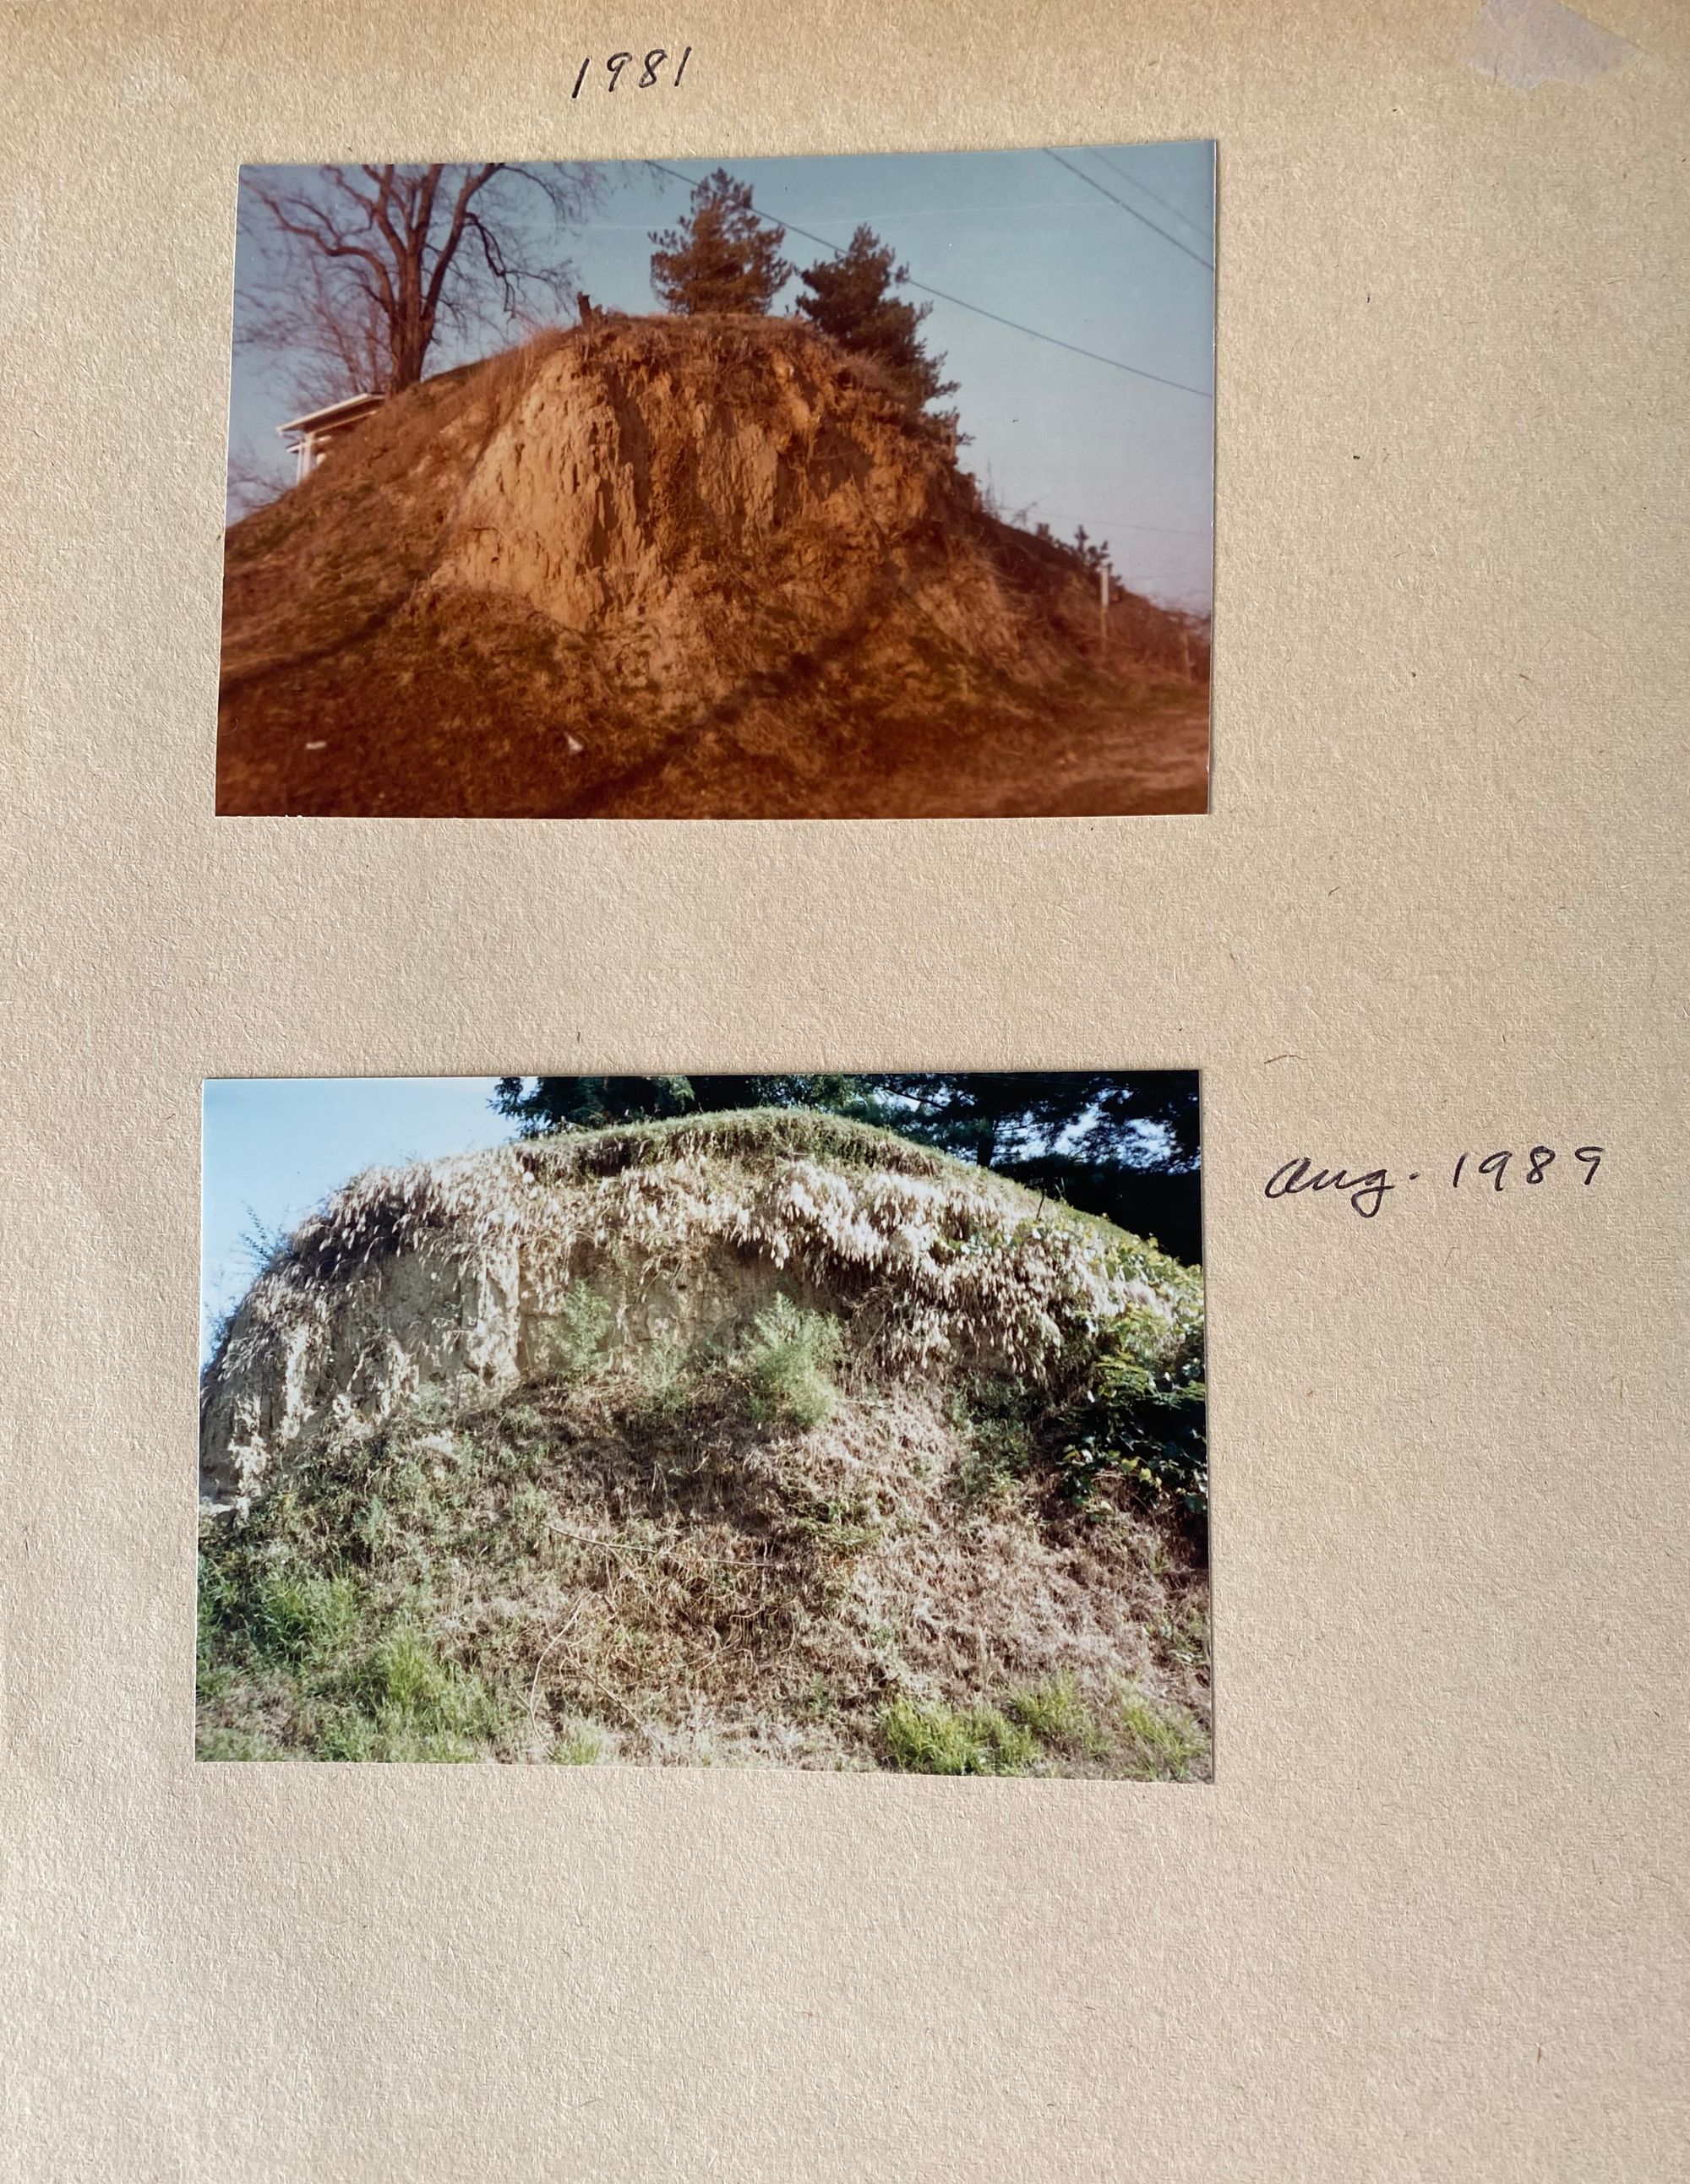 Color photographs from 1981 and 1989, respectively, of the same nondescript mound.